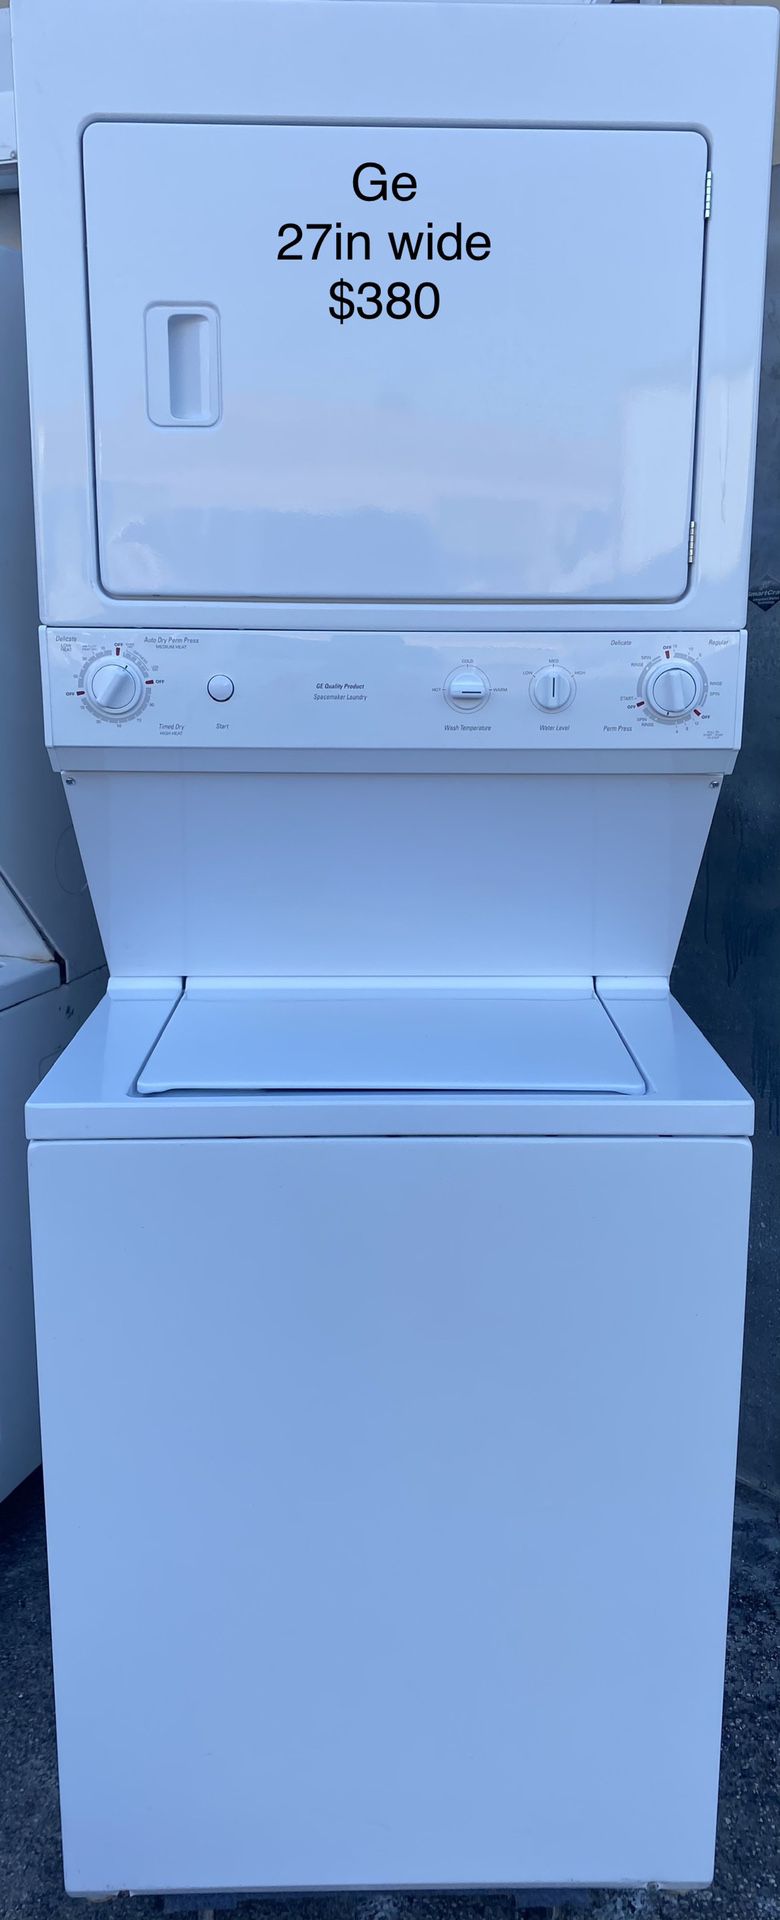 Ge Stackable Washer Dryer